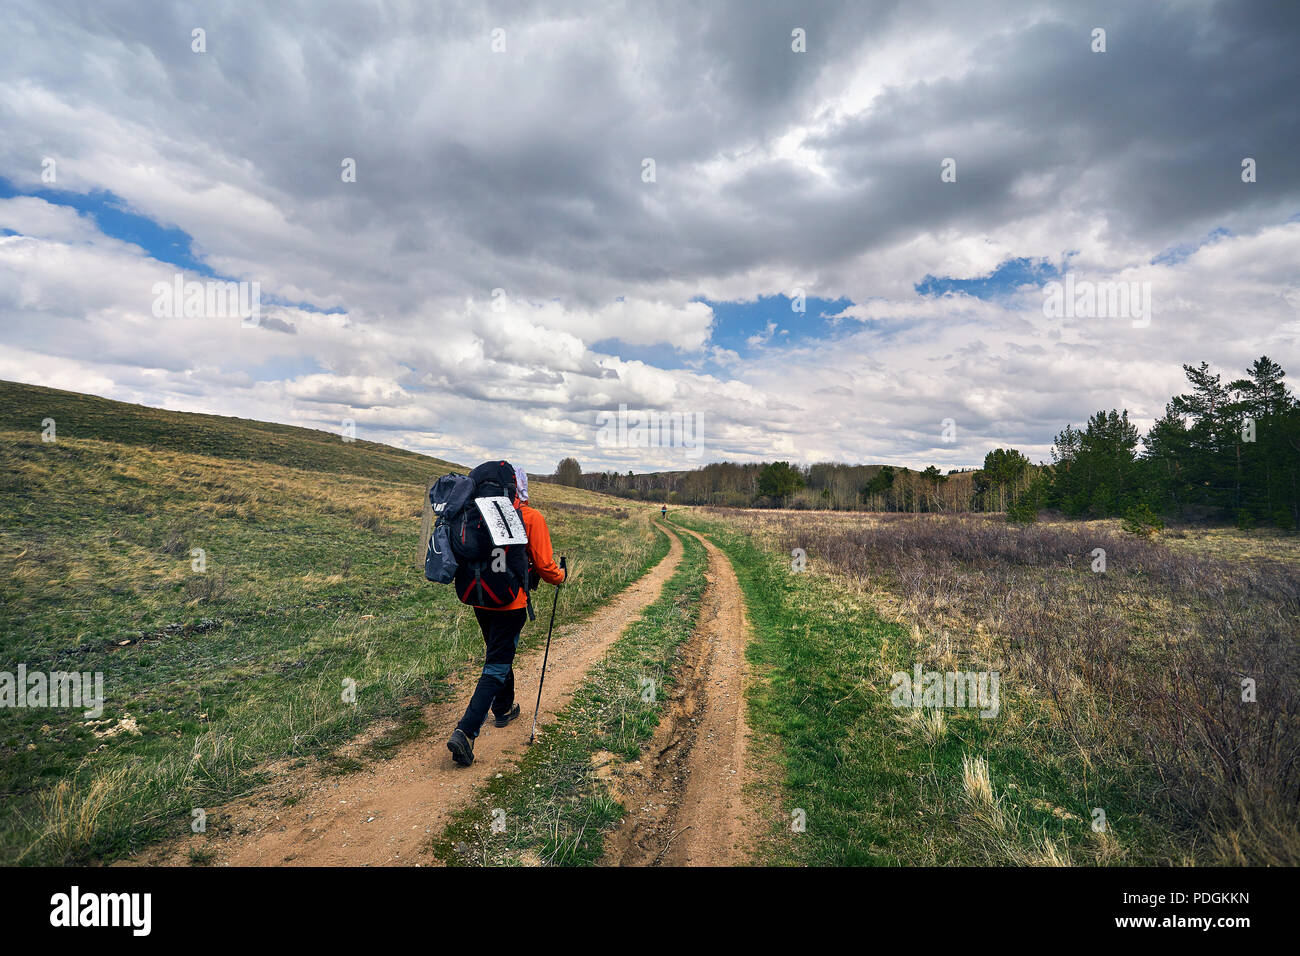 Hiker in with big backpack walking to the country road near the forest against cloudy sky in Karkaraly national park in Central Kazakhstan Stock Photo